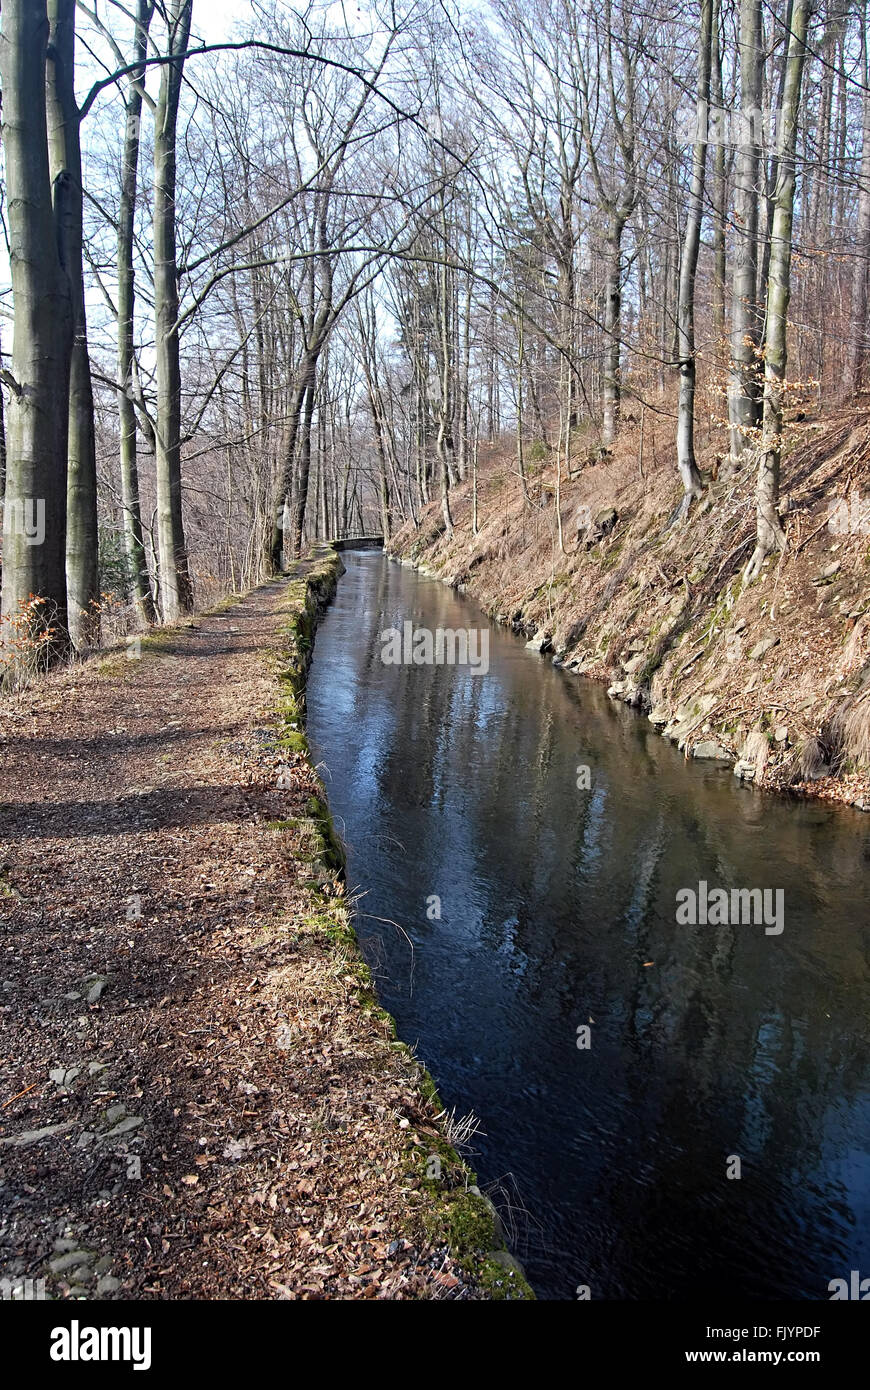 technical monument Weisshuhnuv kanal water channel during late winter day without snow near Hradec nad Moravici Stock Photo